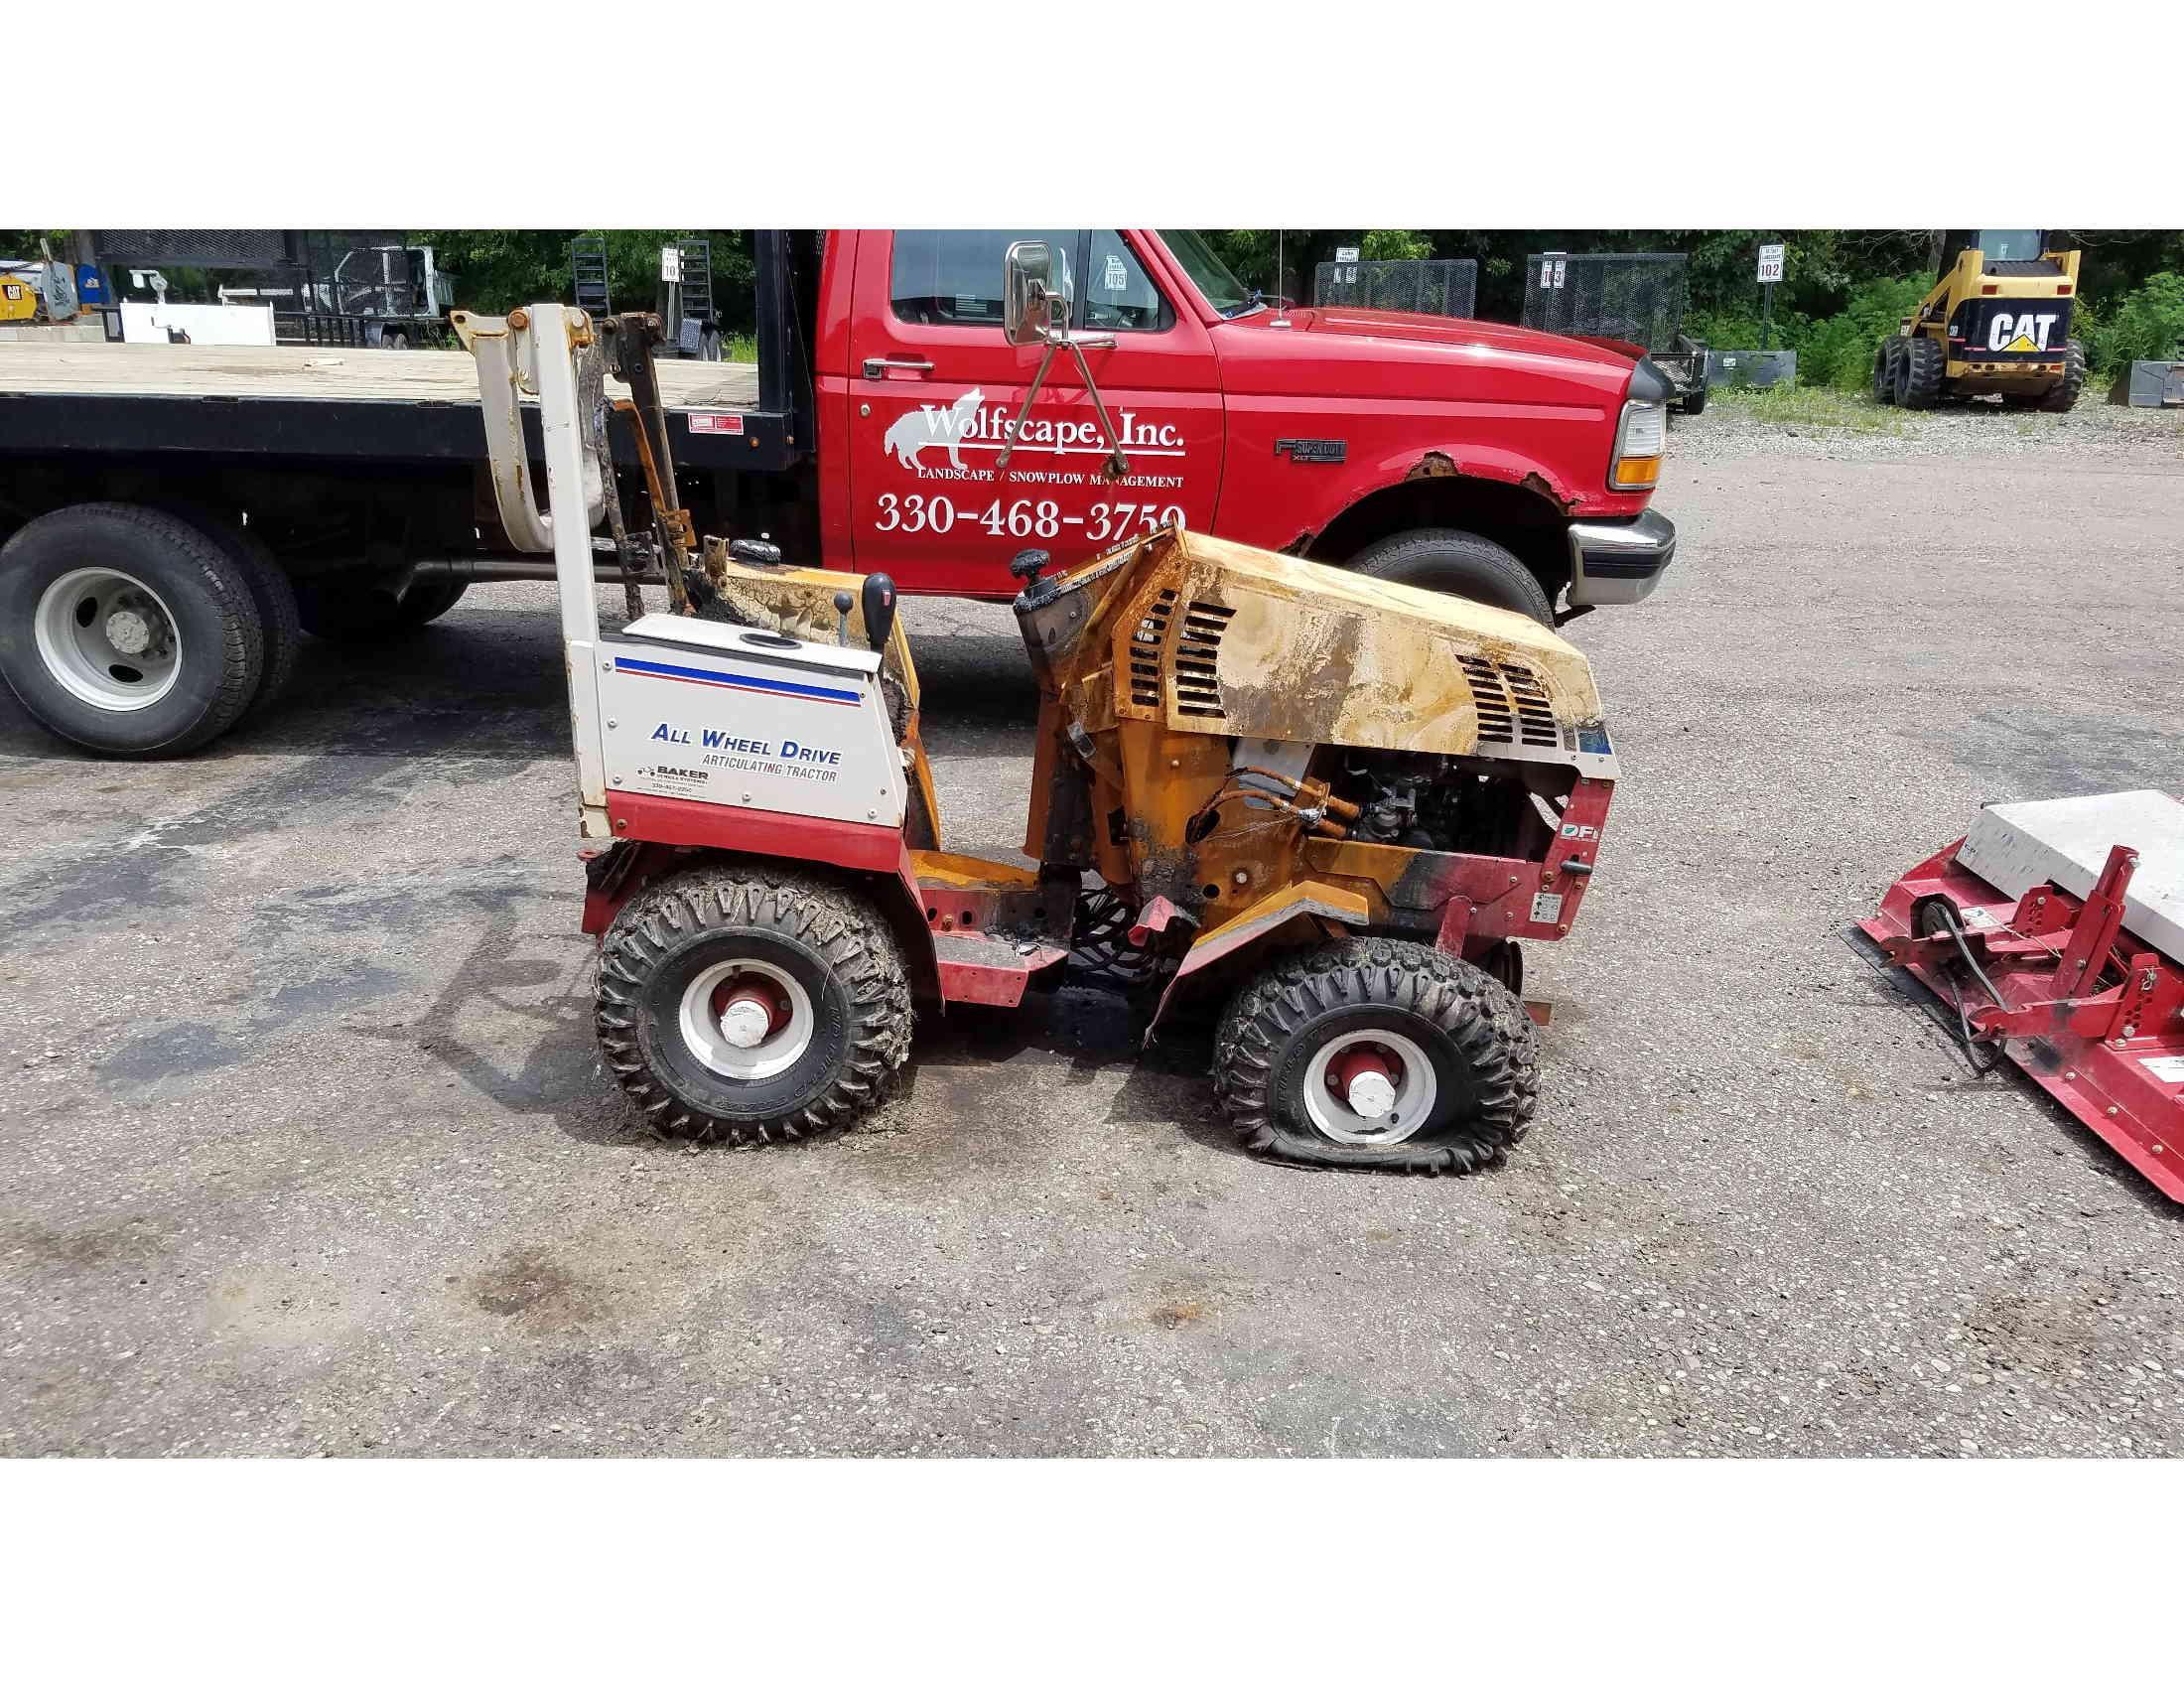 All wheel drive articulating tractor